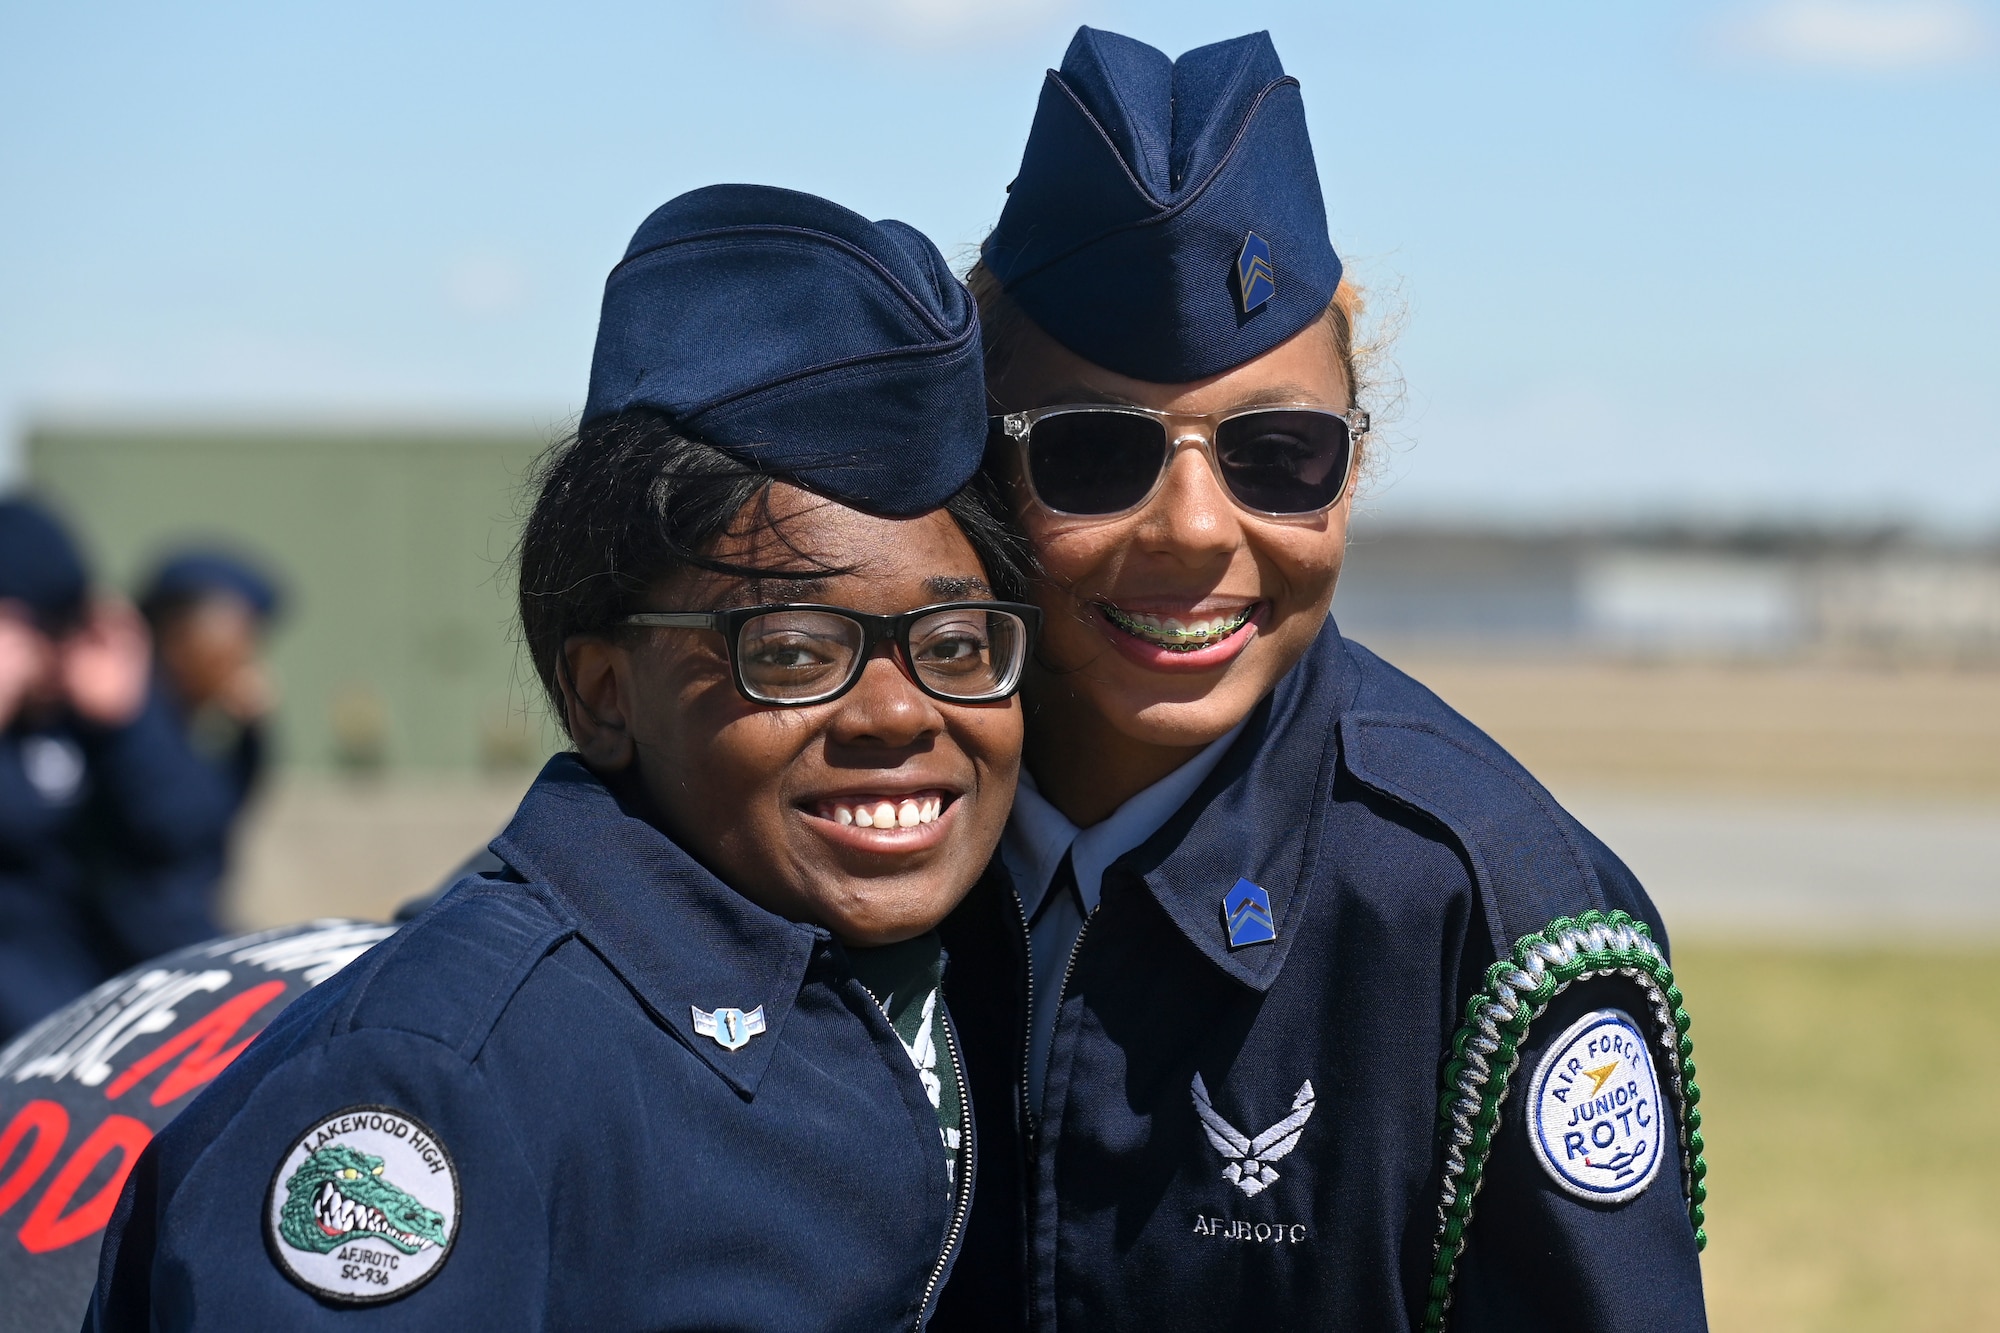 Students from Lakewood High School from Sumter, South Carolina pose for a photo during the annual Top Gun Drill Meet at McEntire Joint National Guard Base, South Carolina, March 26, 2022. High School Junior Reserve Officers Training Corps cadets from twenty high schools from across the state competed in twelve drill and ceremony events sponsored by the South Carolina Air National Guard. (U.S. Air National Guard photo by Tech. Sgt. Megan Floyd, 169th Fighter Wing Public Affairs)